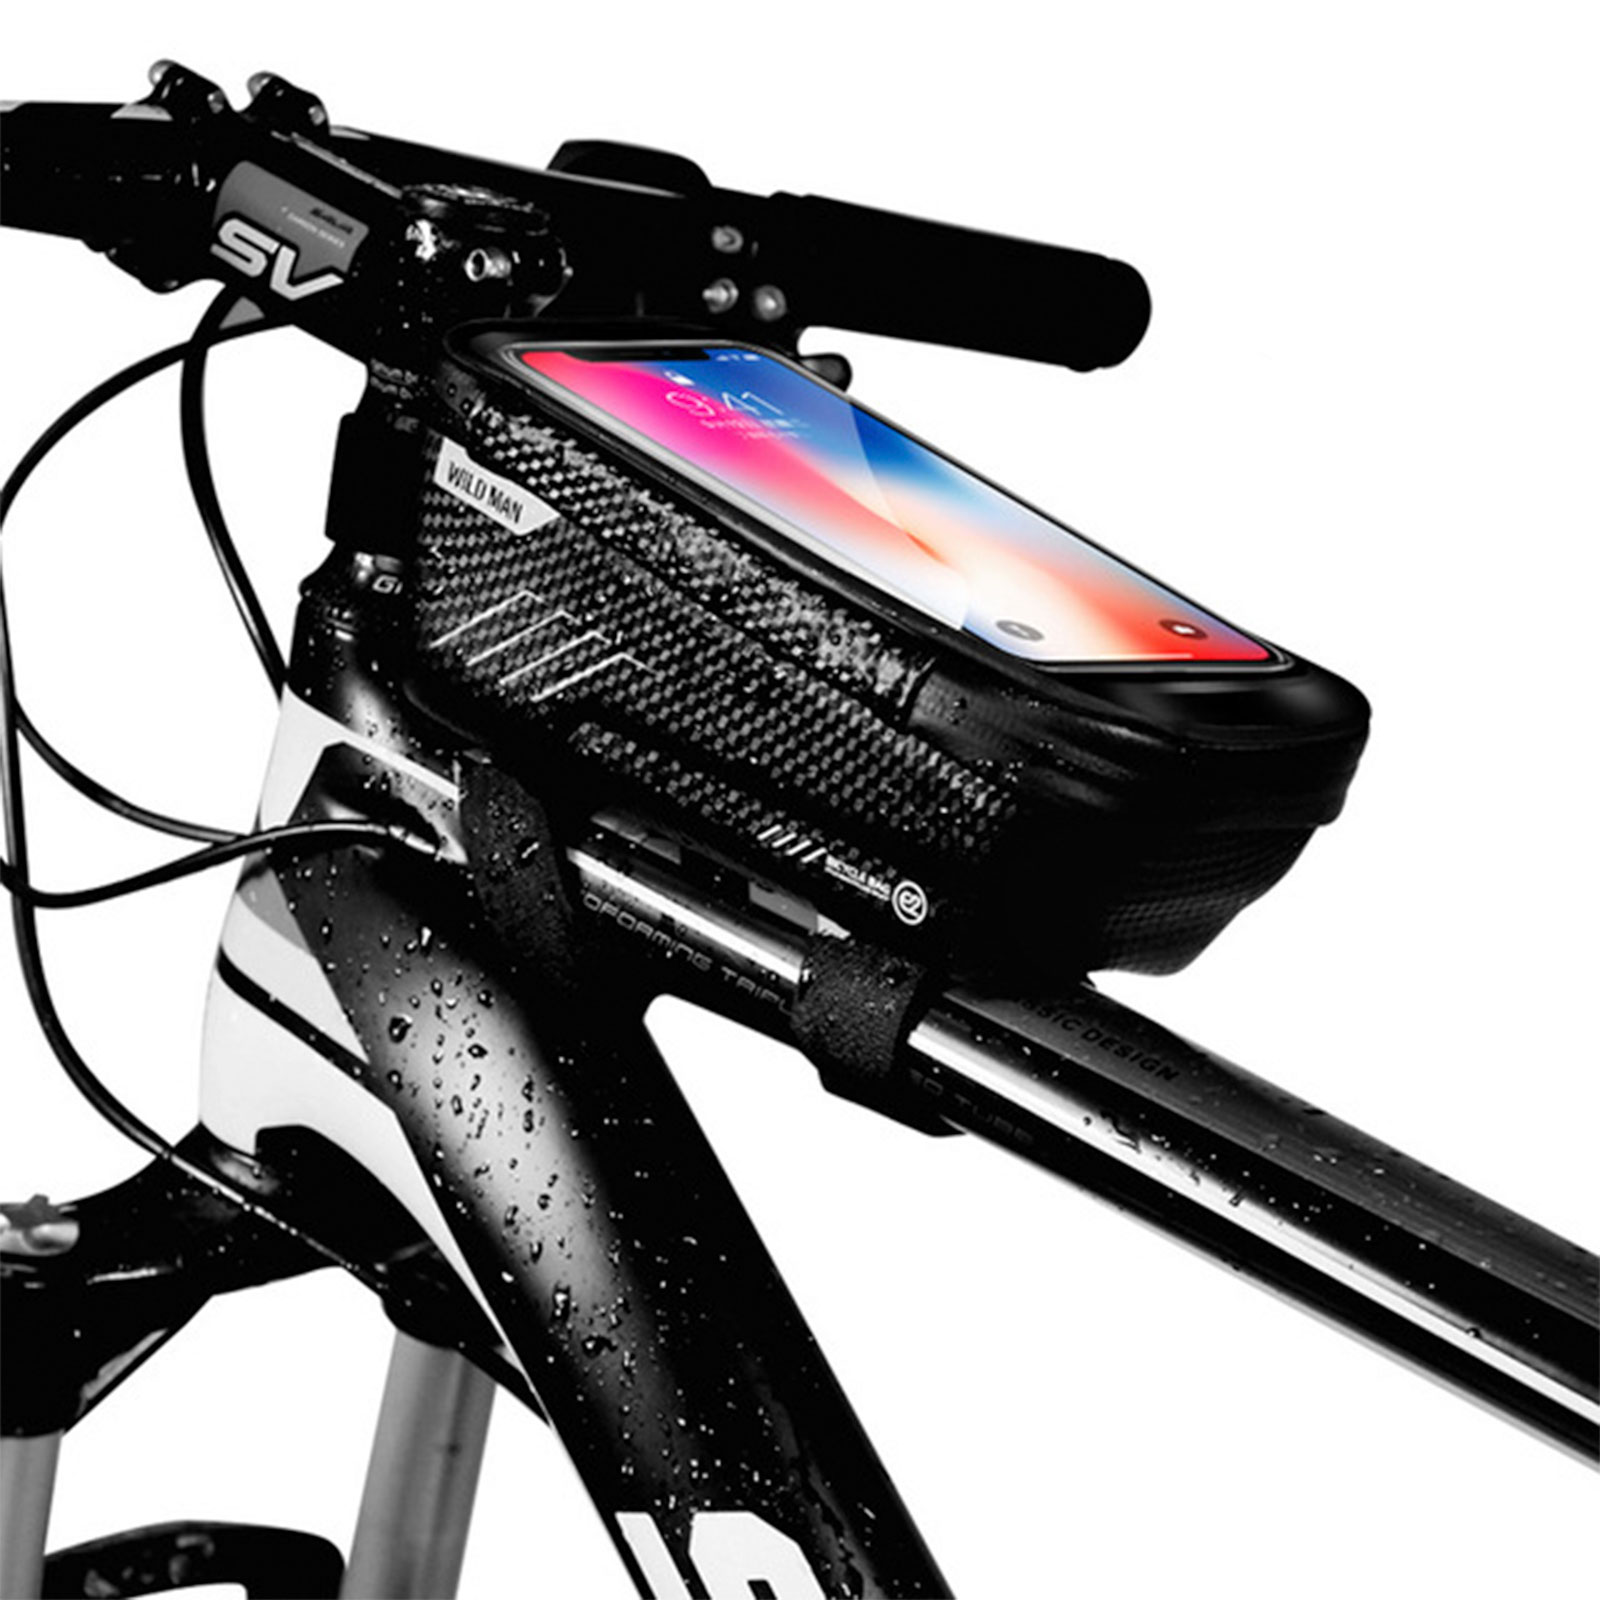 Cycling Bike Bicycle Frame Pannier Front Tube Pouch Bag Waterproof Phone Holder